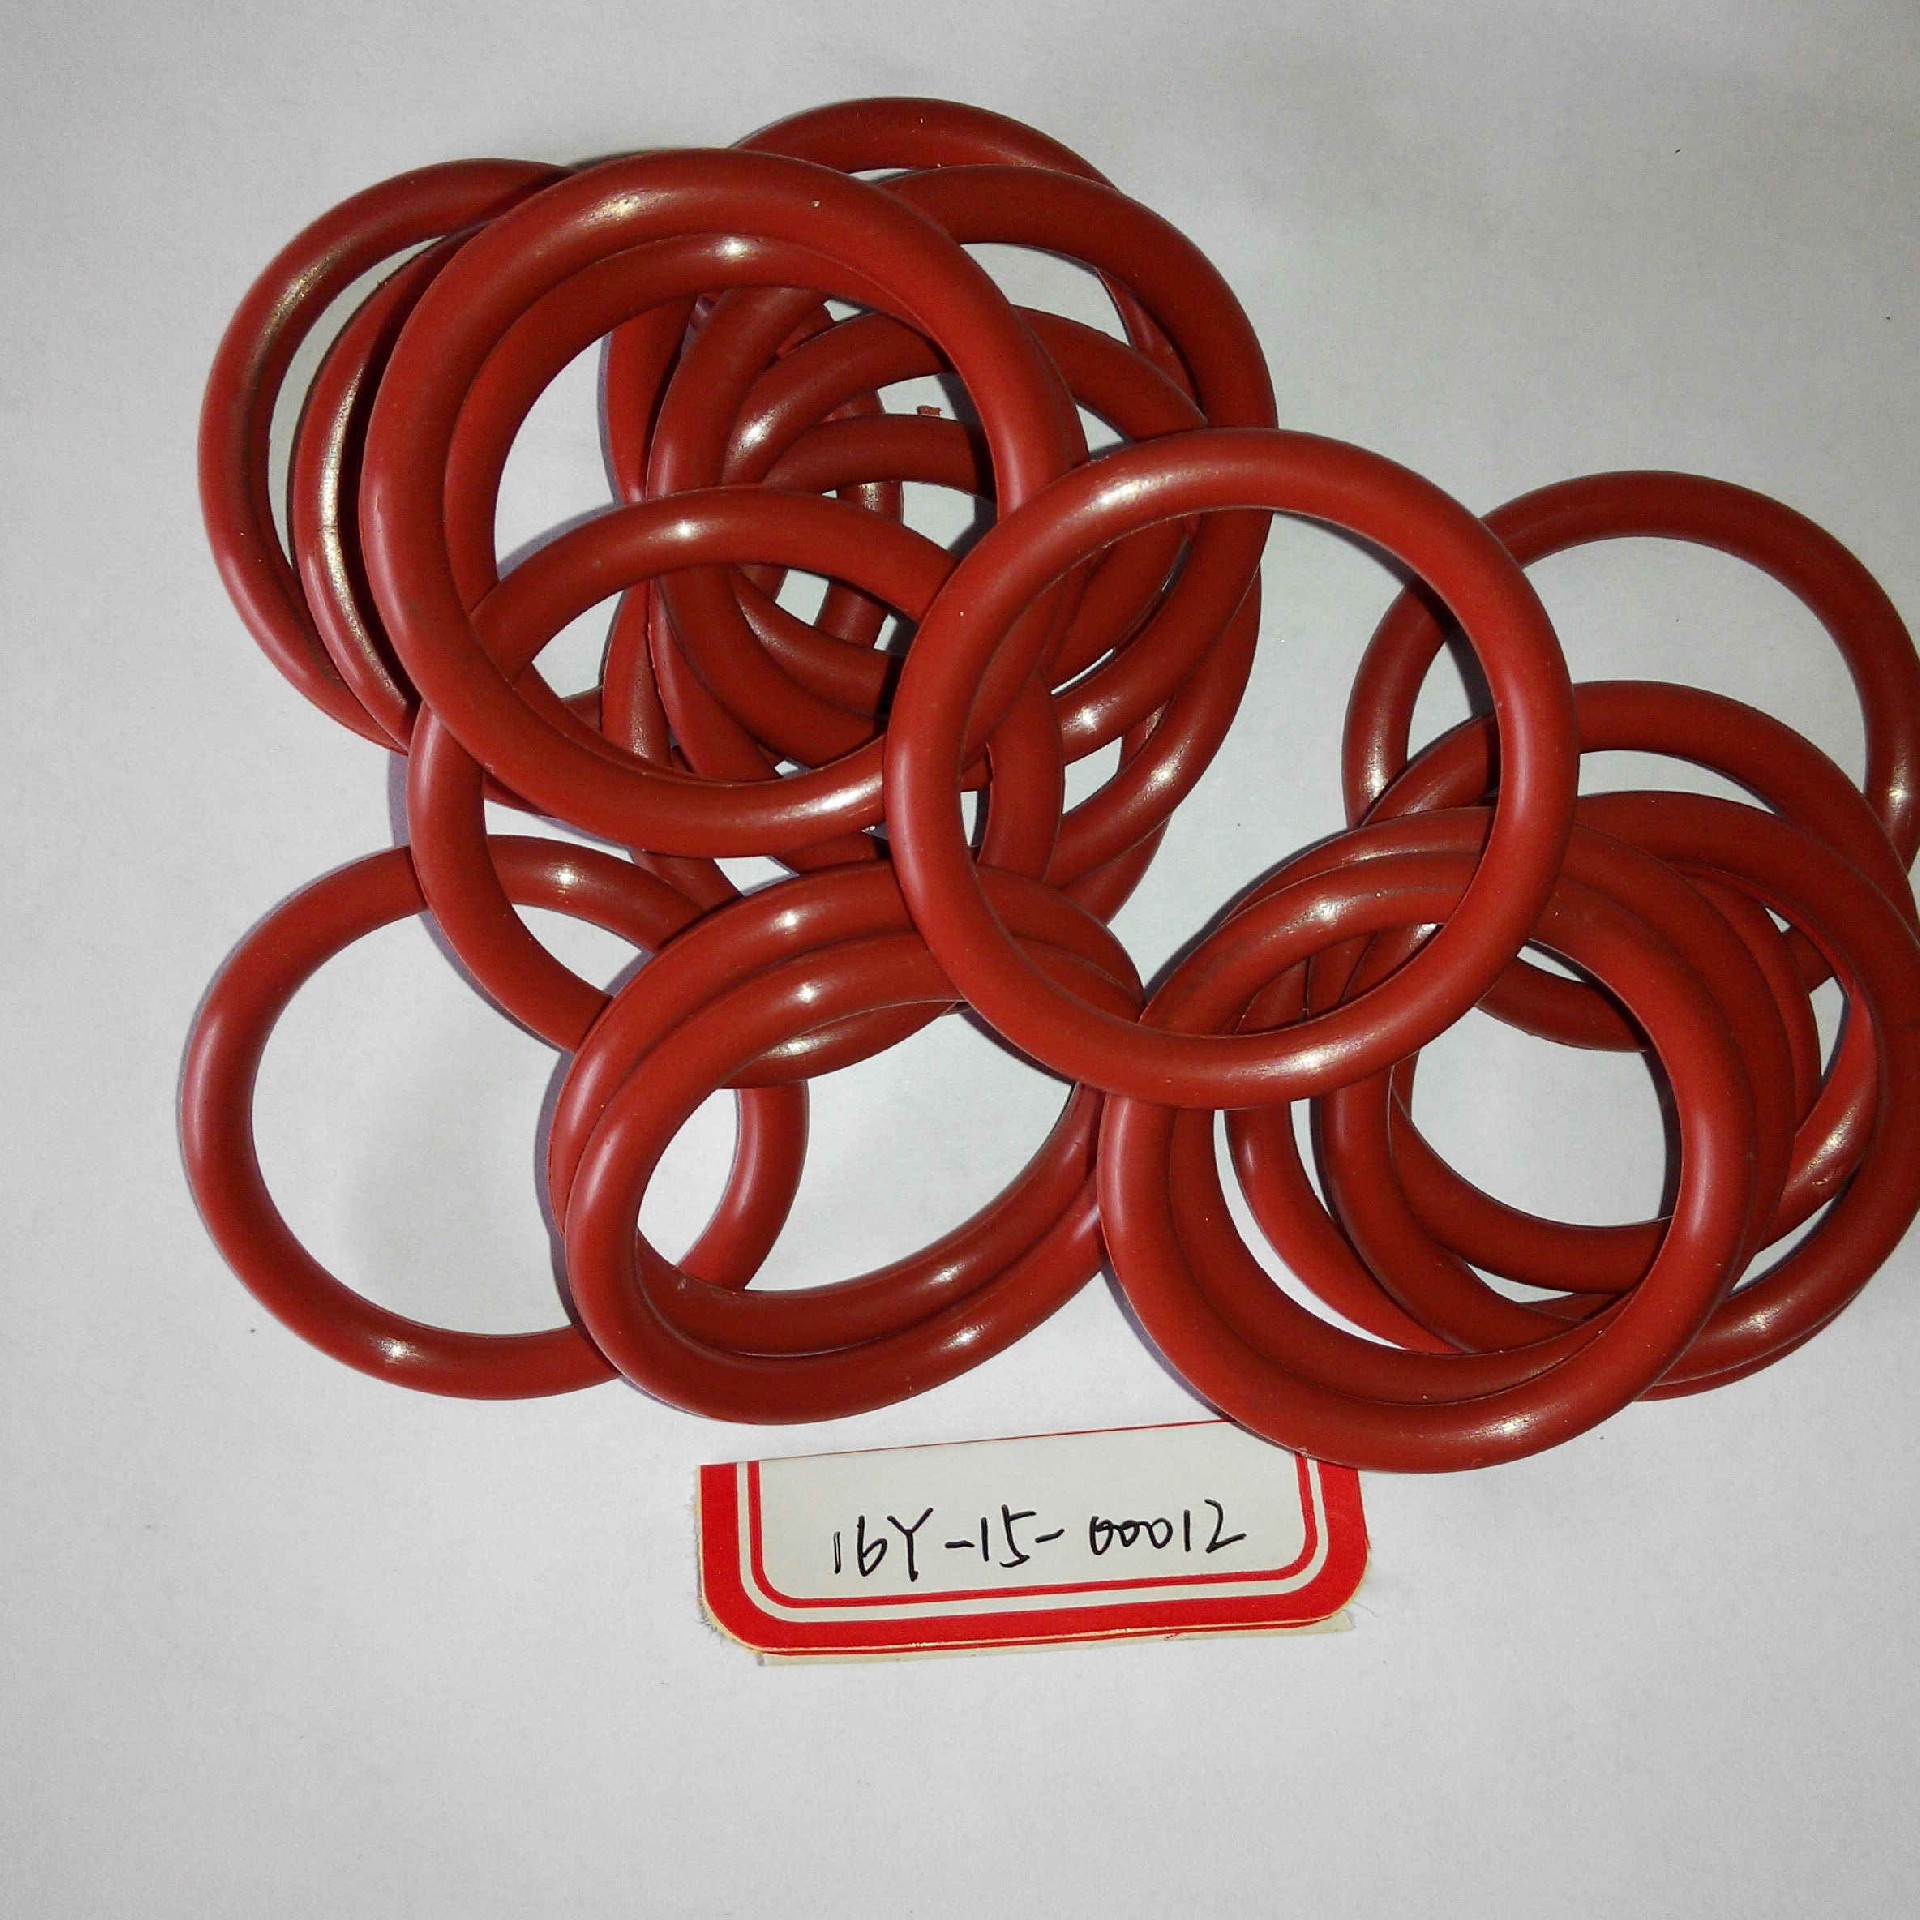 16Y-15-00012 		O-ring red